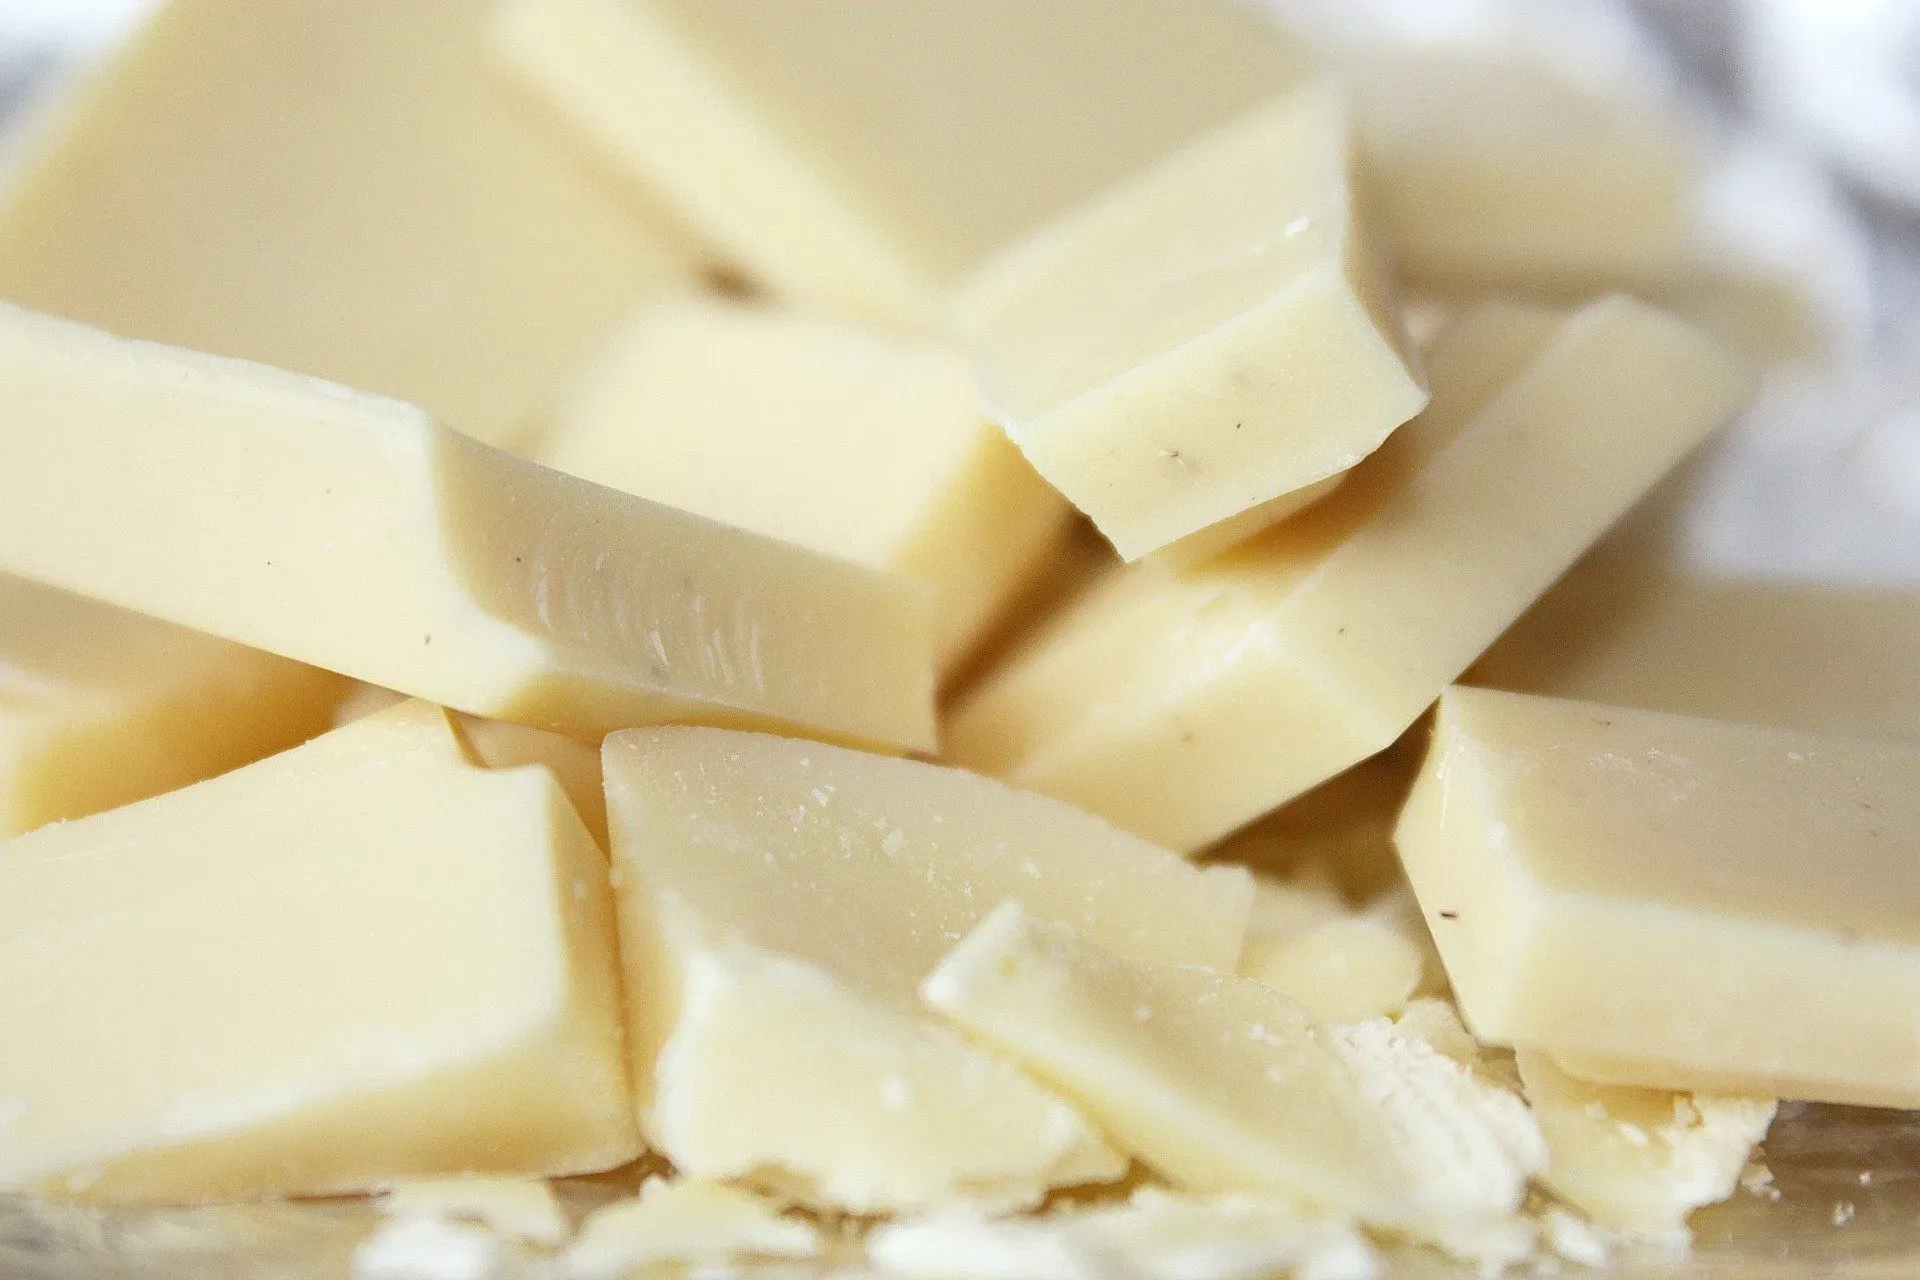 Facts about how is white chocolate made includes that this treat should be served cool to relish the overwhelming richness and fattiness of white chocolate.